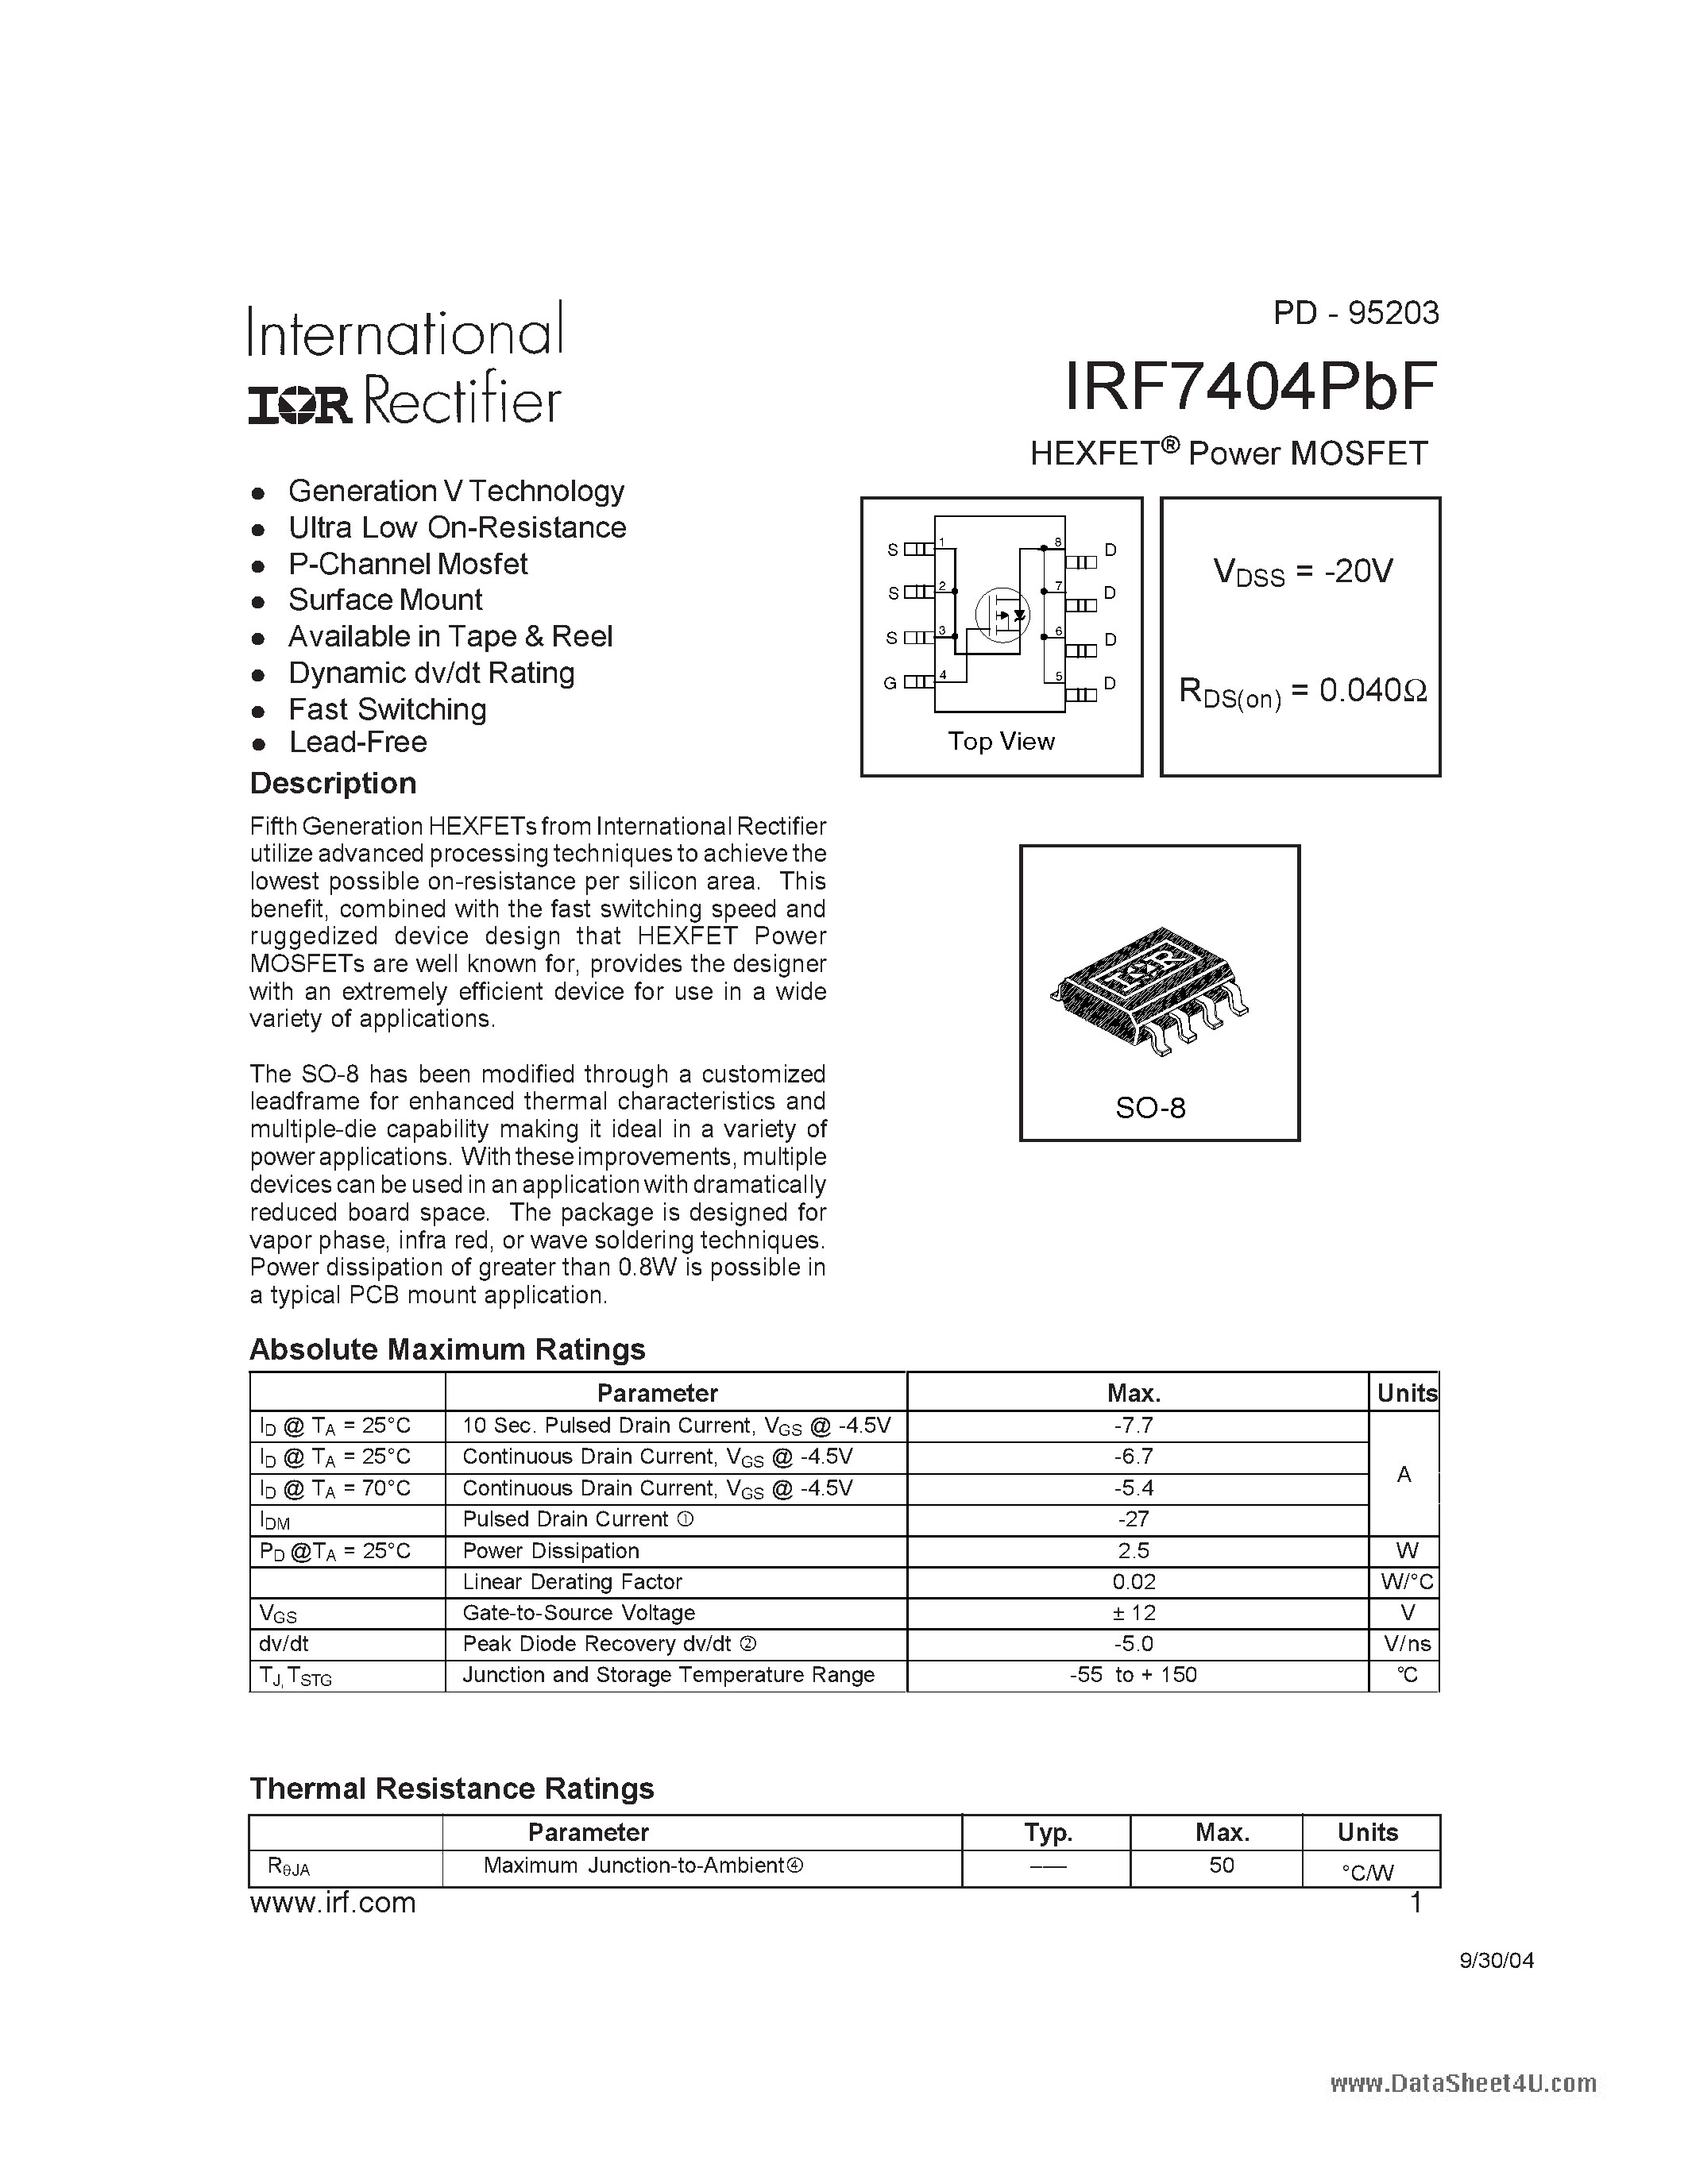 Datasheet IRF7404PBF - HEXFET Power MOSFET page 1